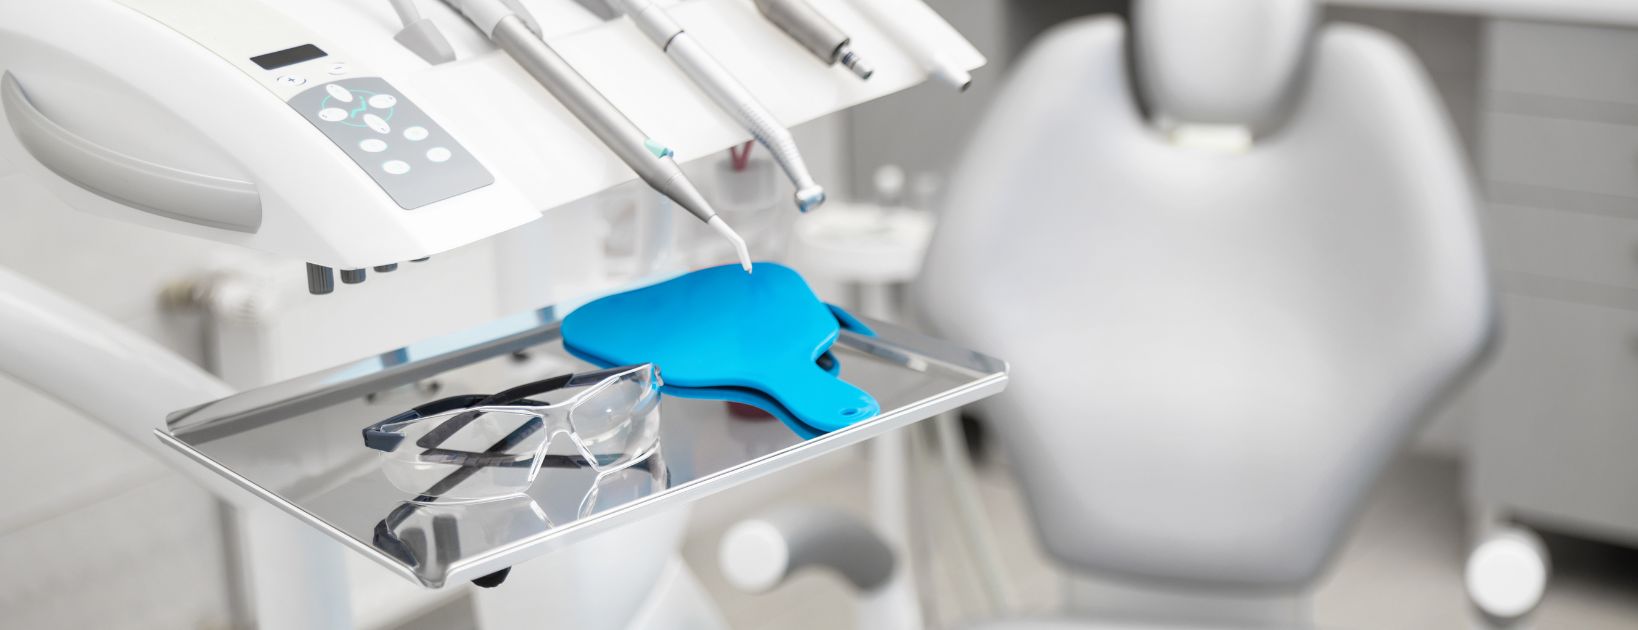 How Technology Helps Dental Industry: The Evolution of Digital Dentistry